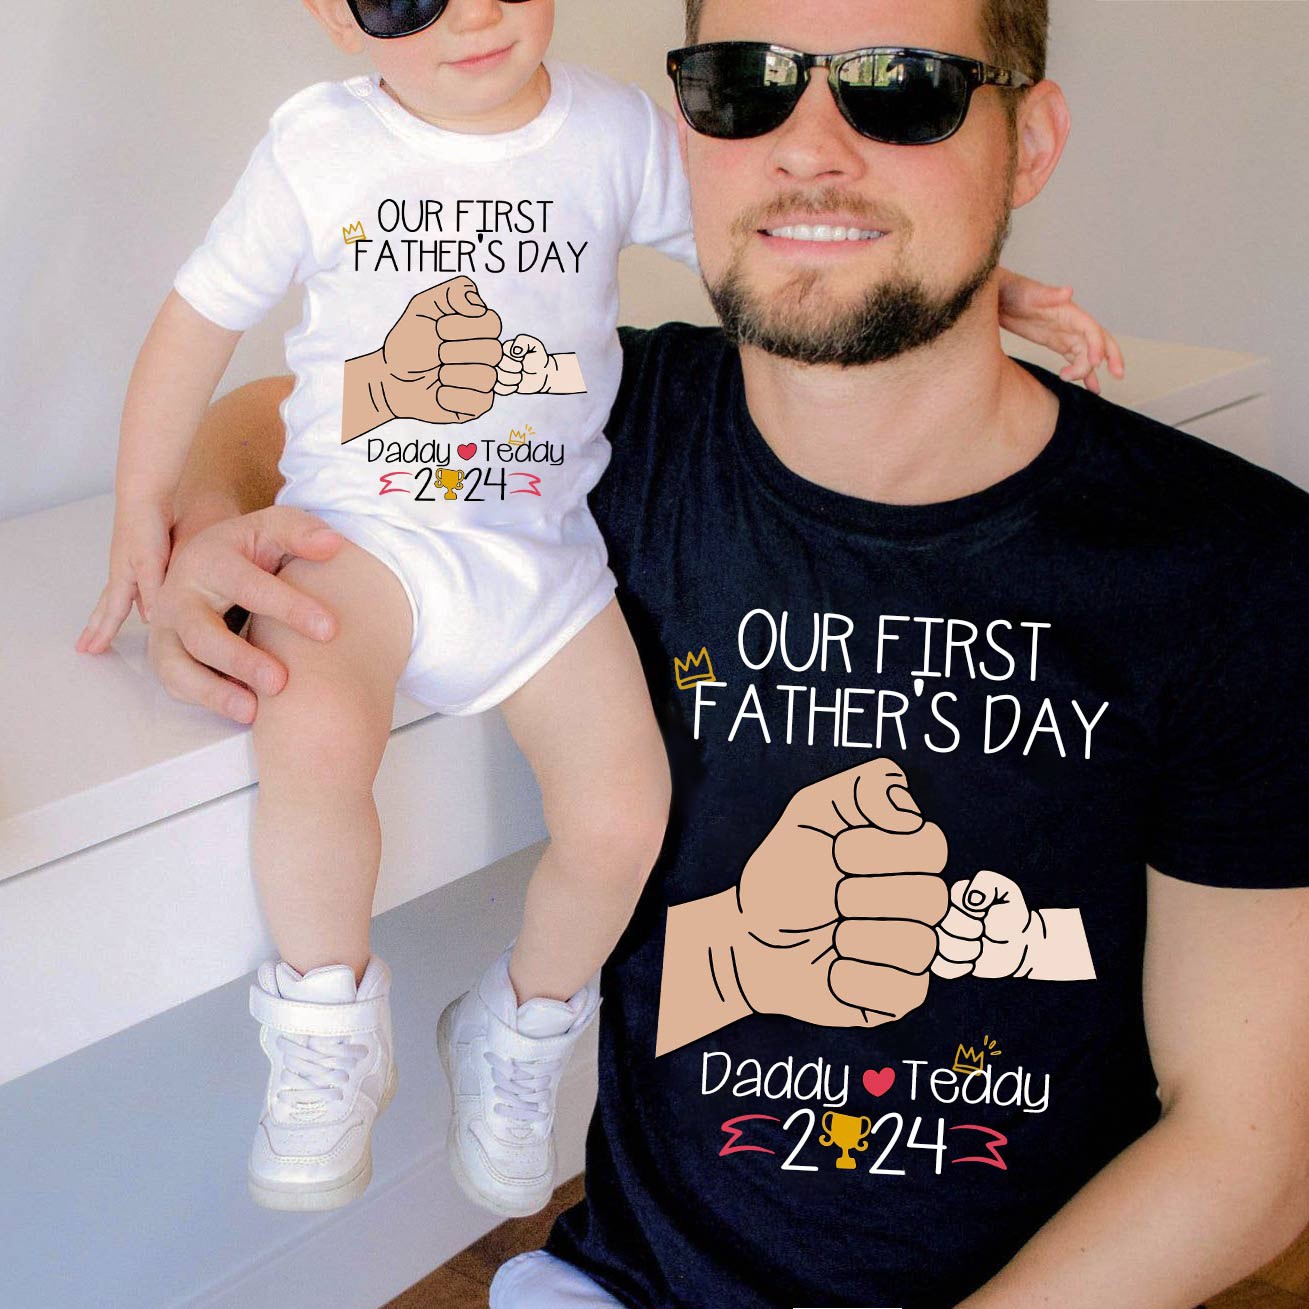 Personalized Hand to Hand Shirts, Matching Daddy Baby Shirts, Dad and Kid First Bump Shirt, Father's Day Gift, Our First Father's Day Shirt for Dad